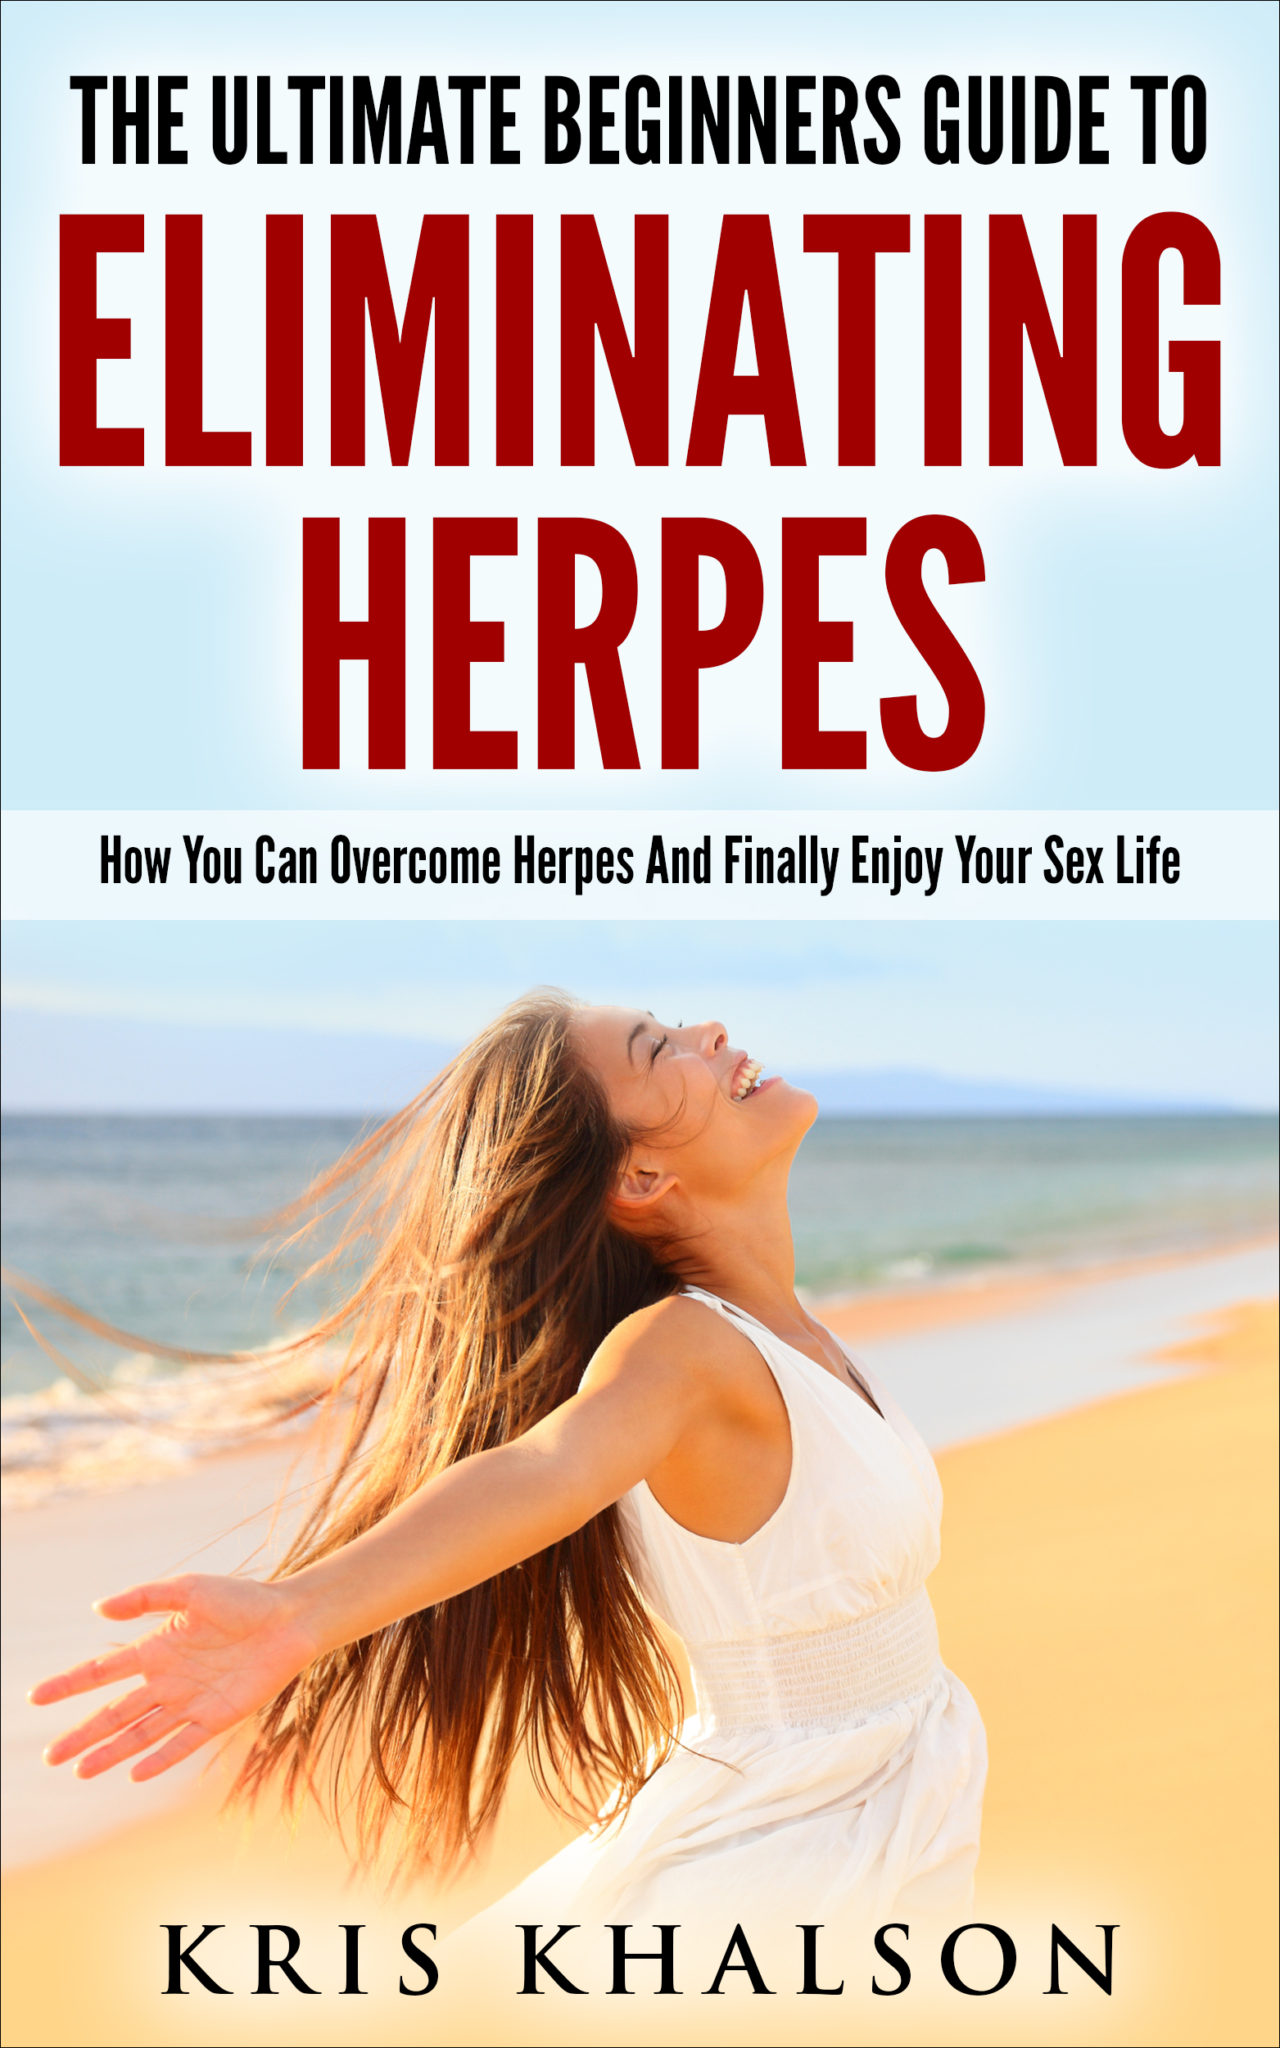 FREE: Herpes: The Ultimate Beginners Guide To Eliminating Herpes: How You Can Overcome Herpes And Finally Enjoy Your Sex Life by Kris Khalson